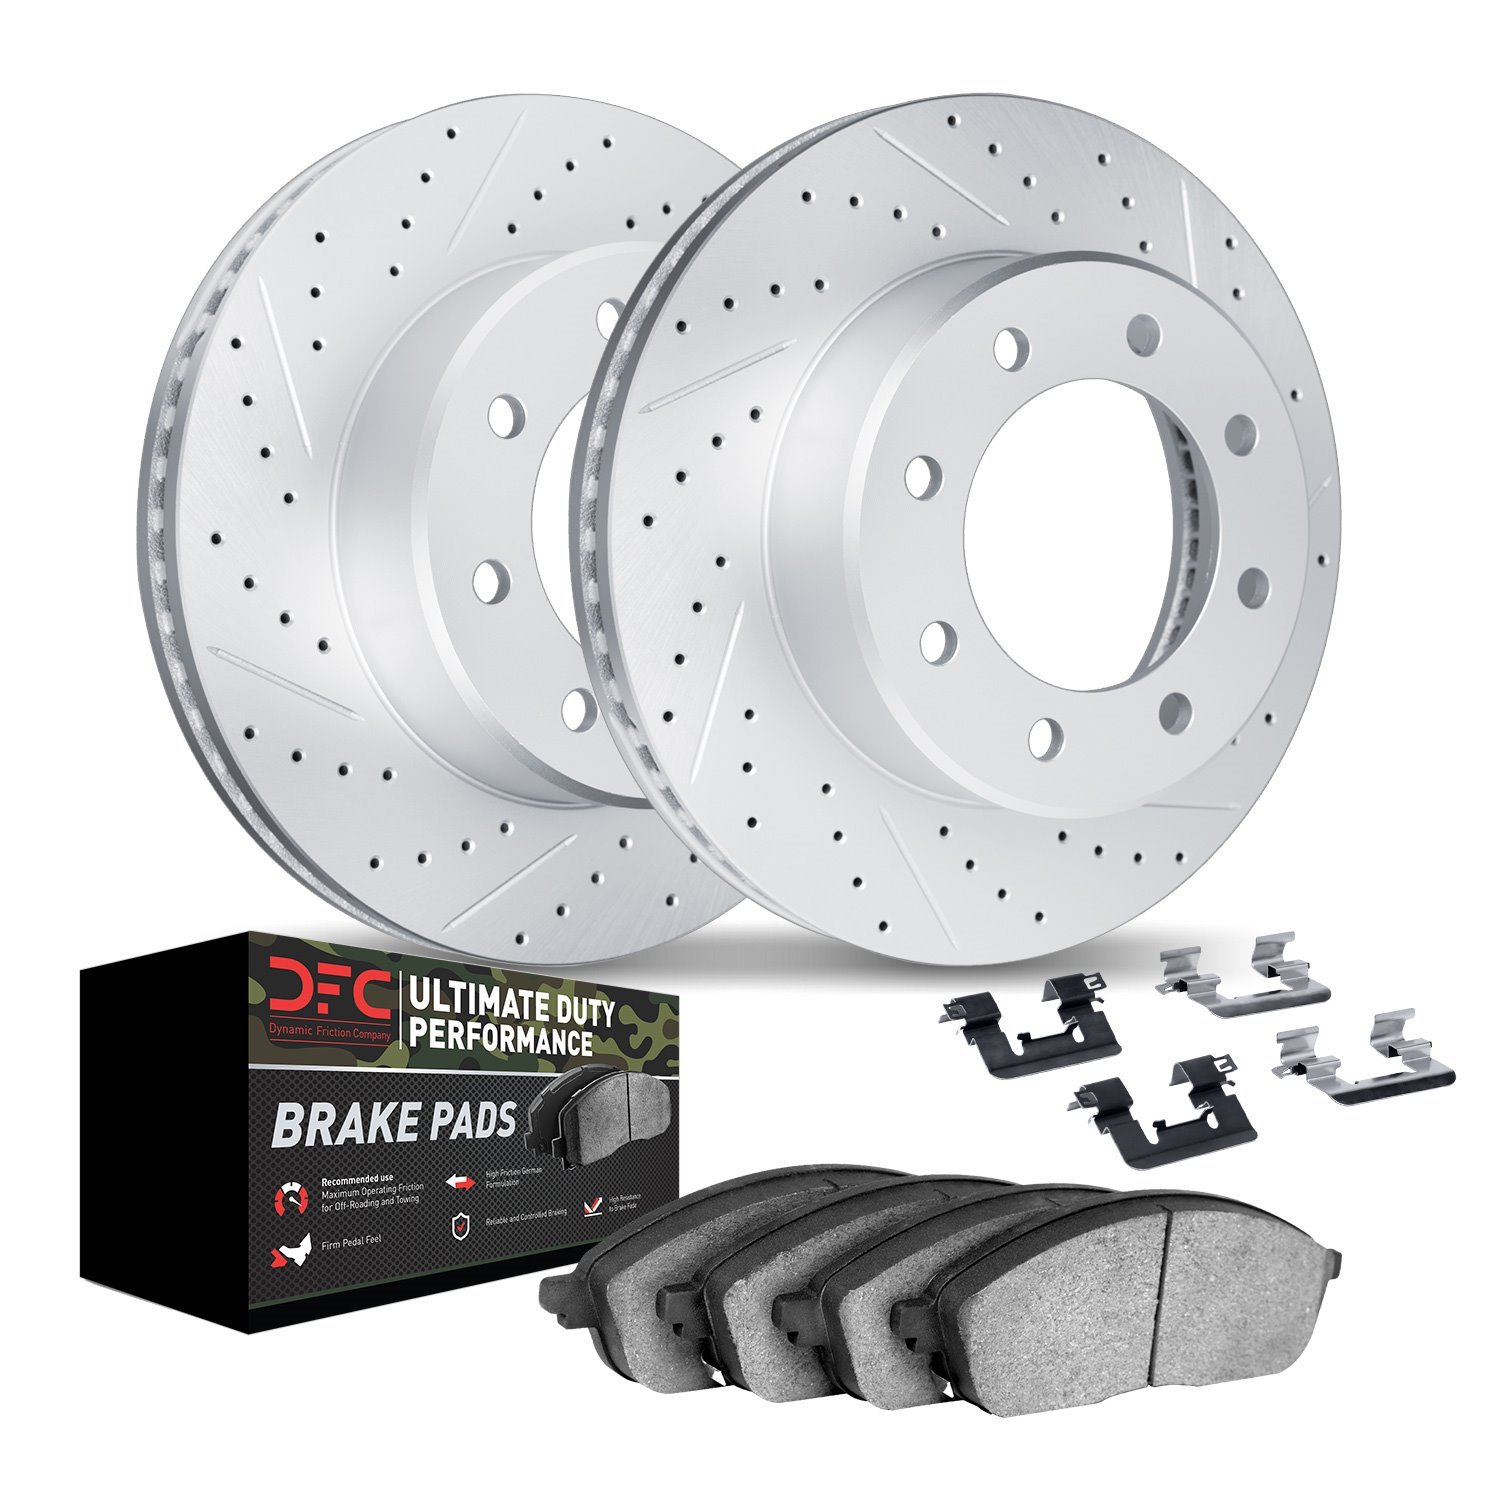 2412-54029 Geoperformance Drilled/Slotted Brake Rotors with Ultimate-Duty Brake Pads Kit & Hardware, 1999-2007 Ford/Lincoln/Merc